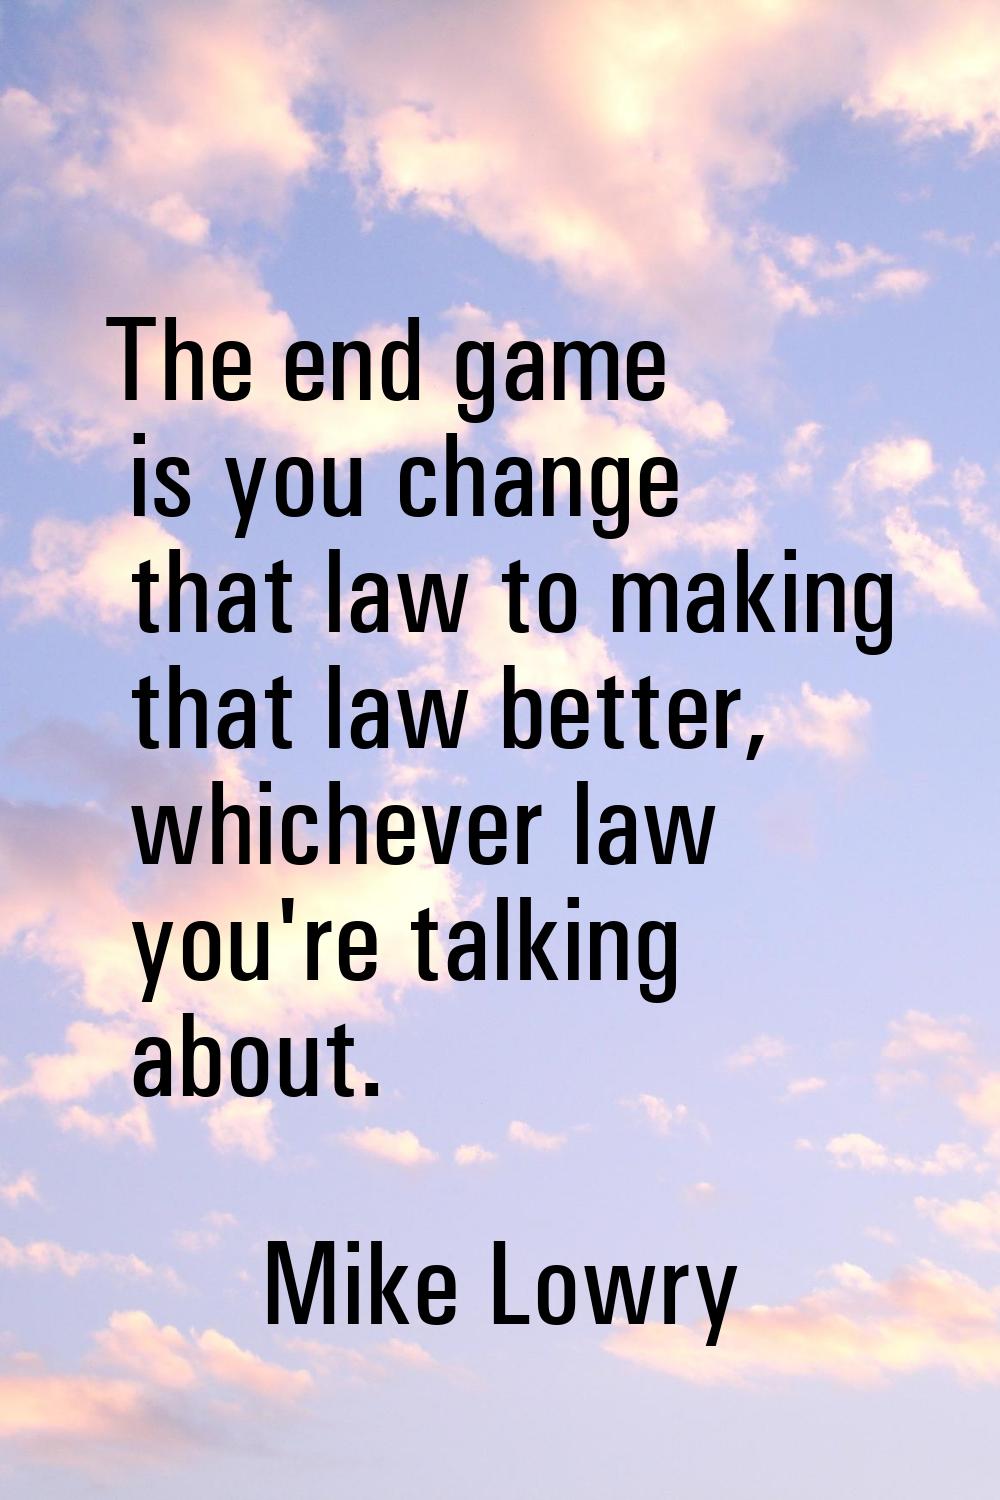 The end game is you change that law to making that law better, whichever law you're talking about.